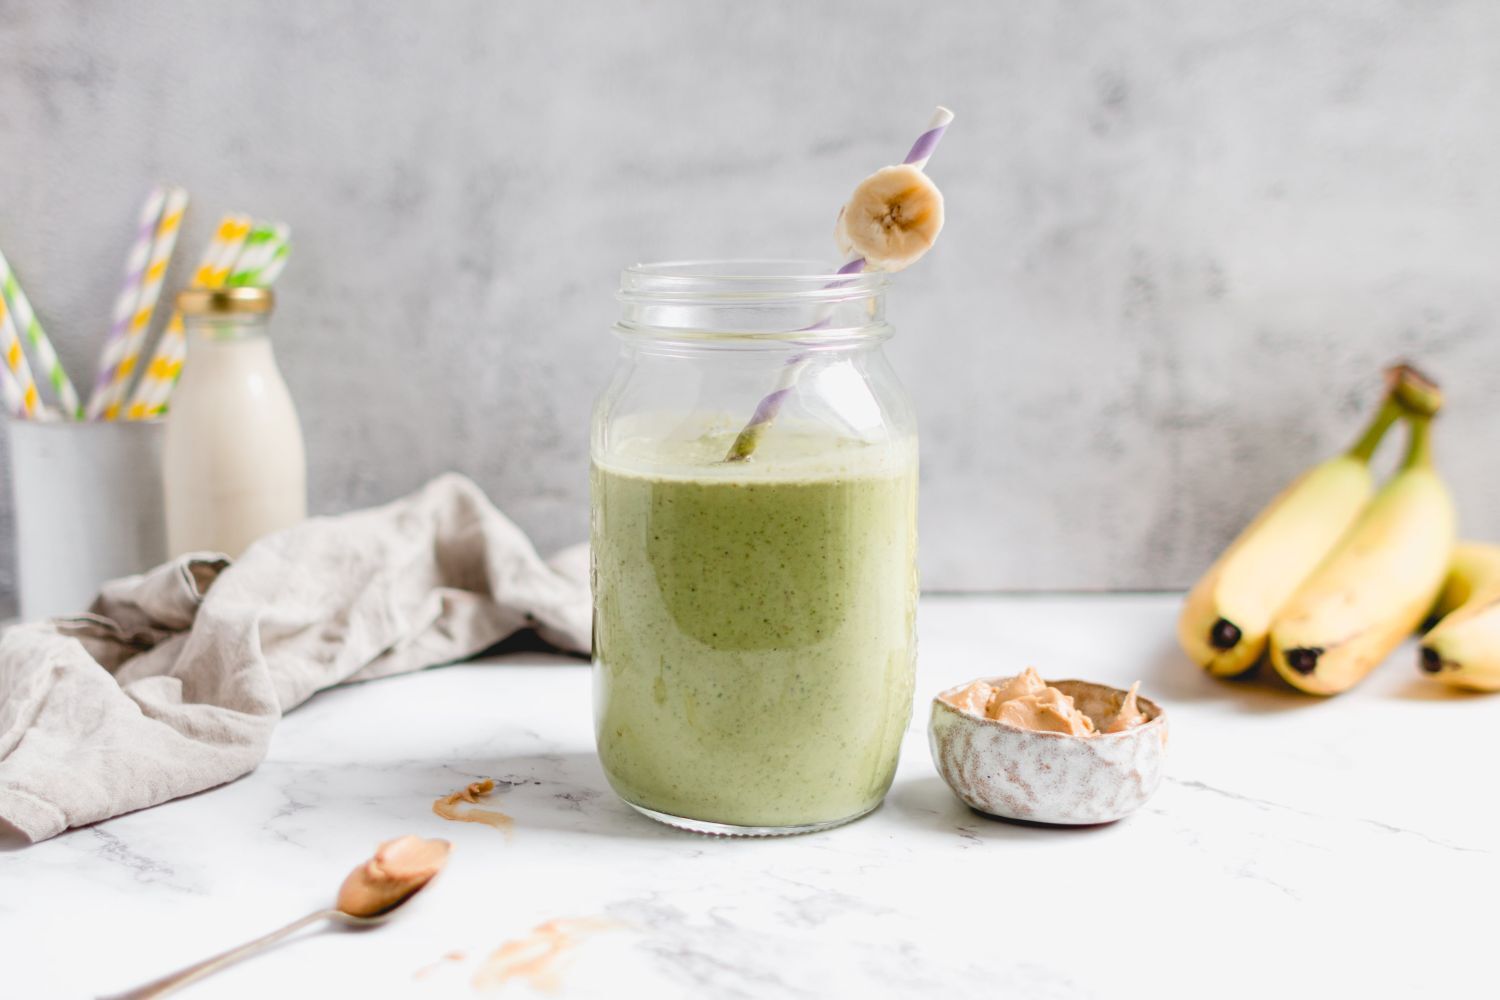 Peanut butter banana green smoothie served in a glass with a slice of banana and a straw.